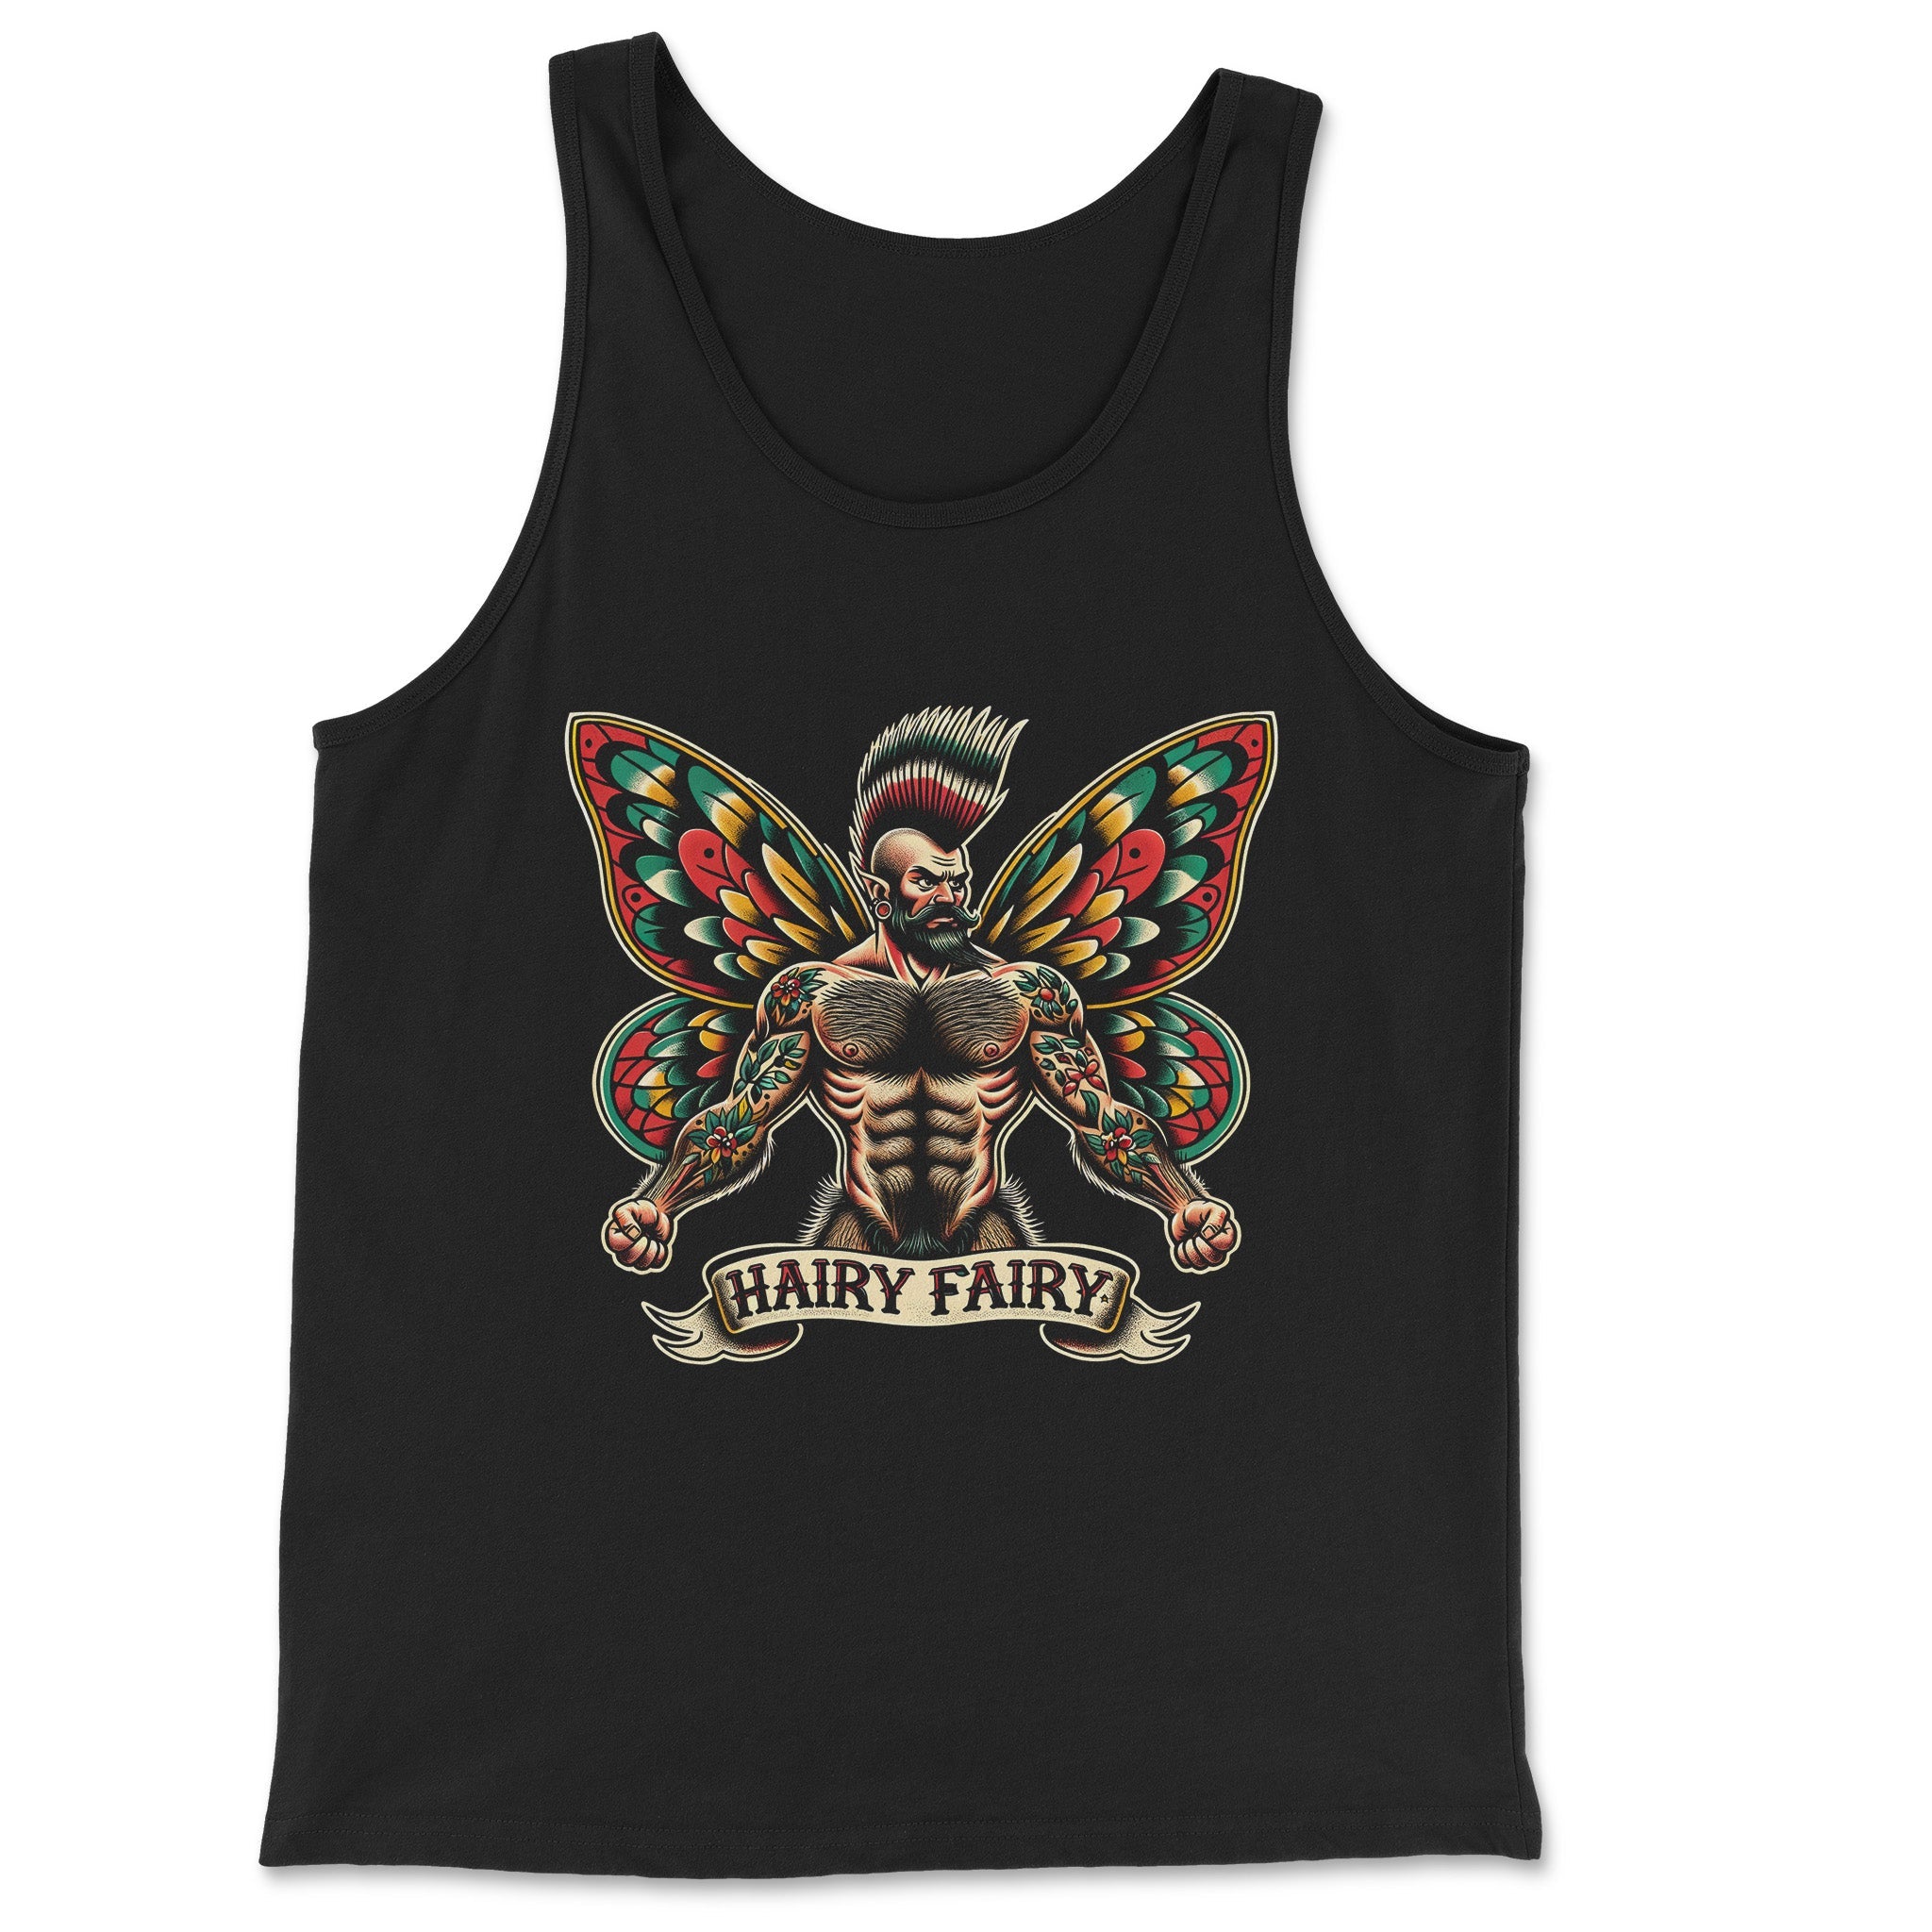 "Hairy Fairy" Muscle Tank Top - Hunky Tops